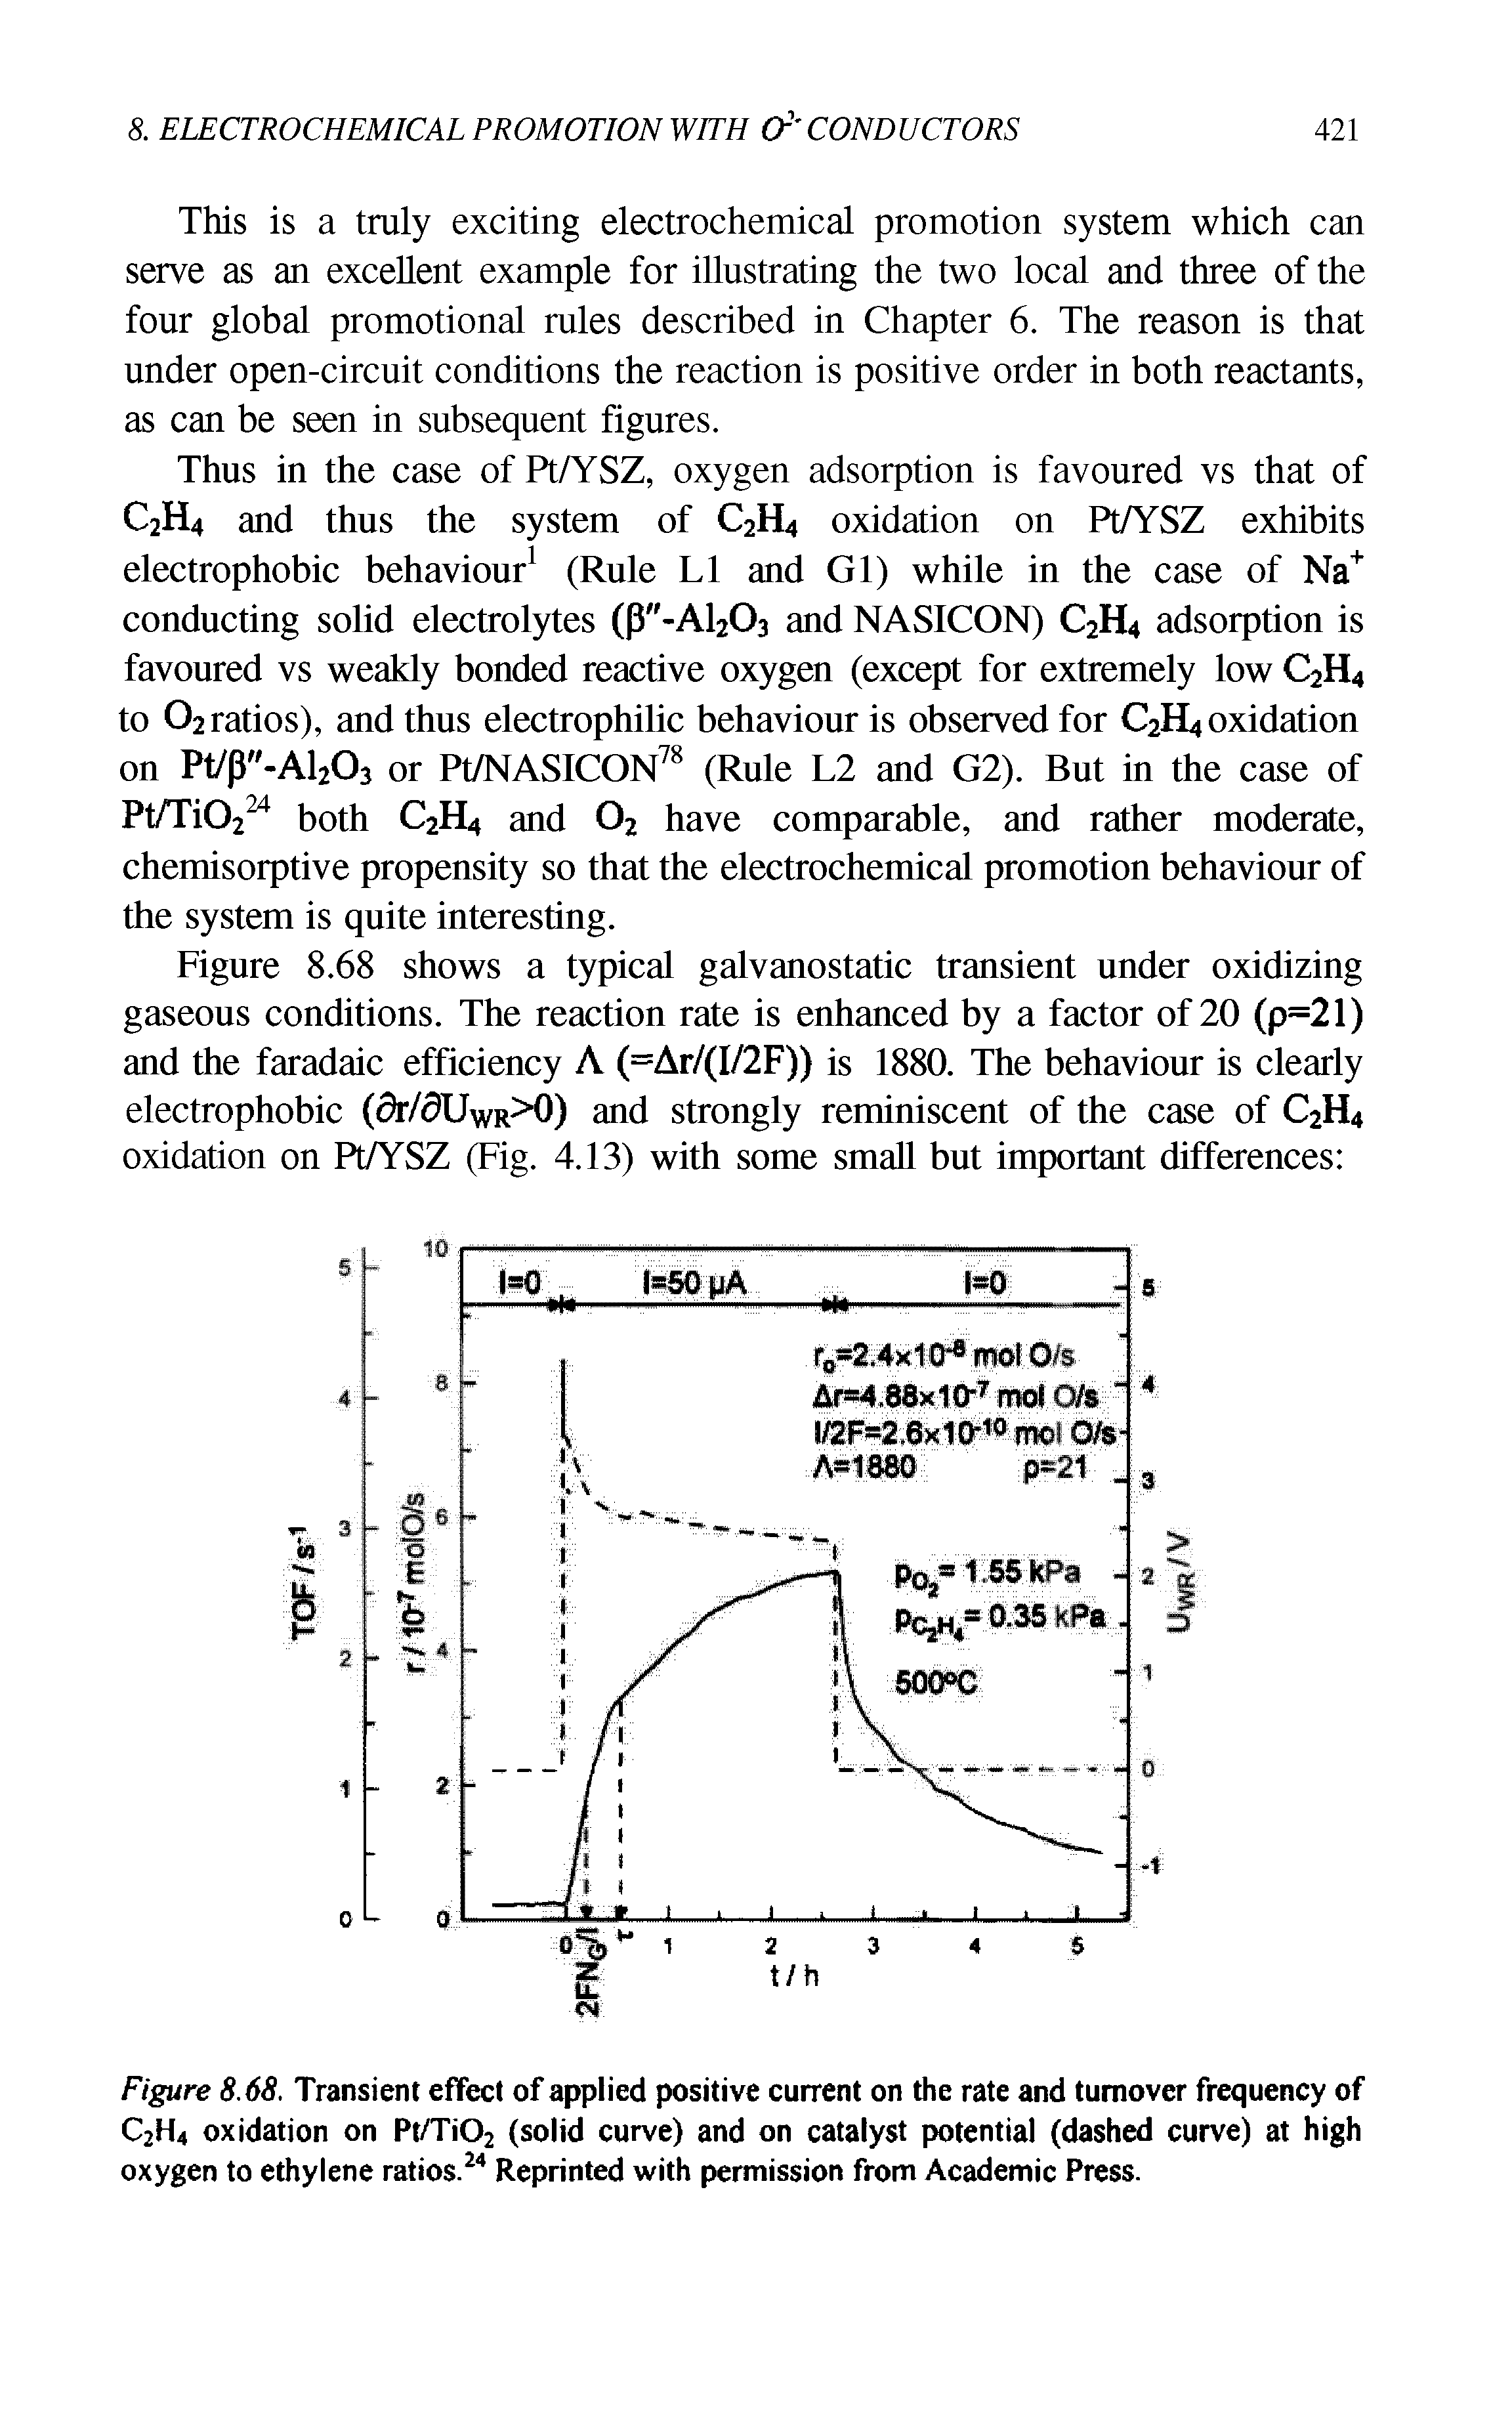 Figure 8.68. Transient effect of applied positive current on the rate and turnover frequency of C2H4 oxidation on Pt/Ti02 (solid curve) and on catalyst potential (dashed curve) at high oxygen to ethylene ratios.24 Reprinted with permission from Academic Press.